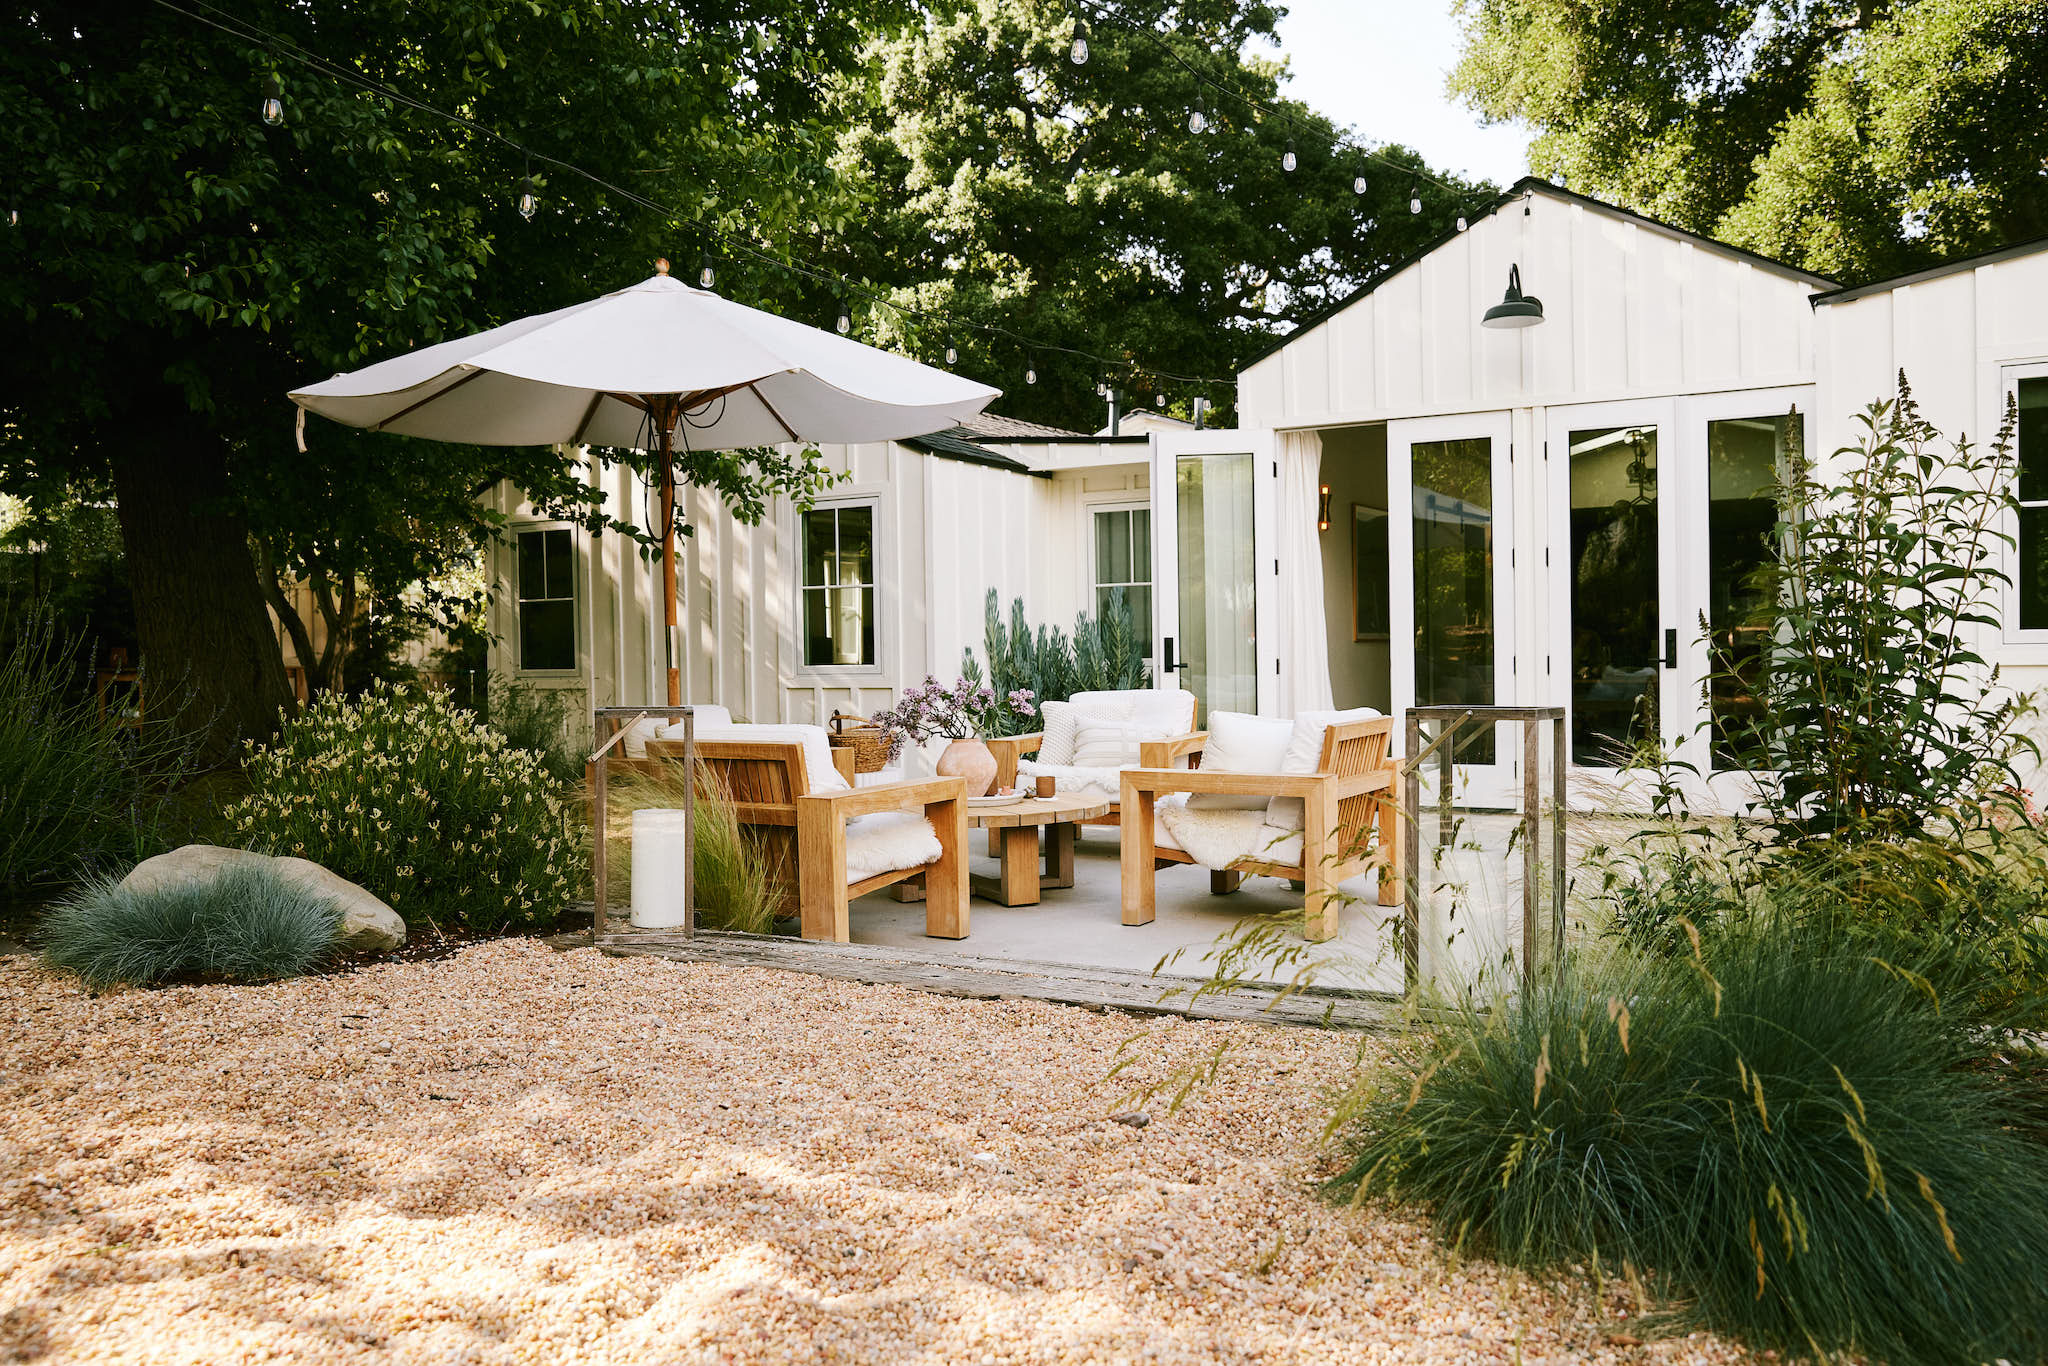 Backyard with pea gravel, shrubs, grasses and an outdoor gathering area with umbrella